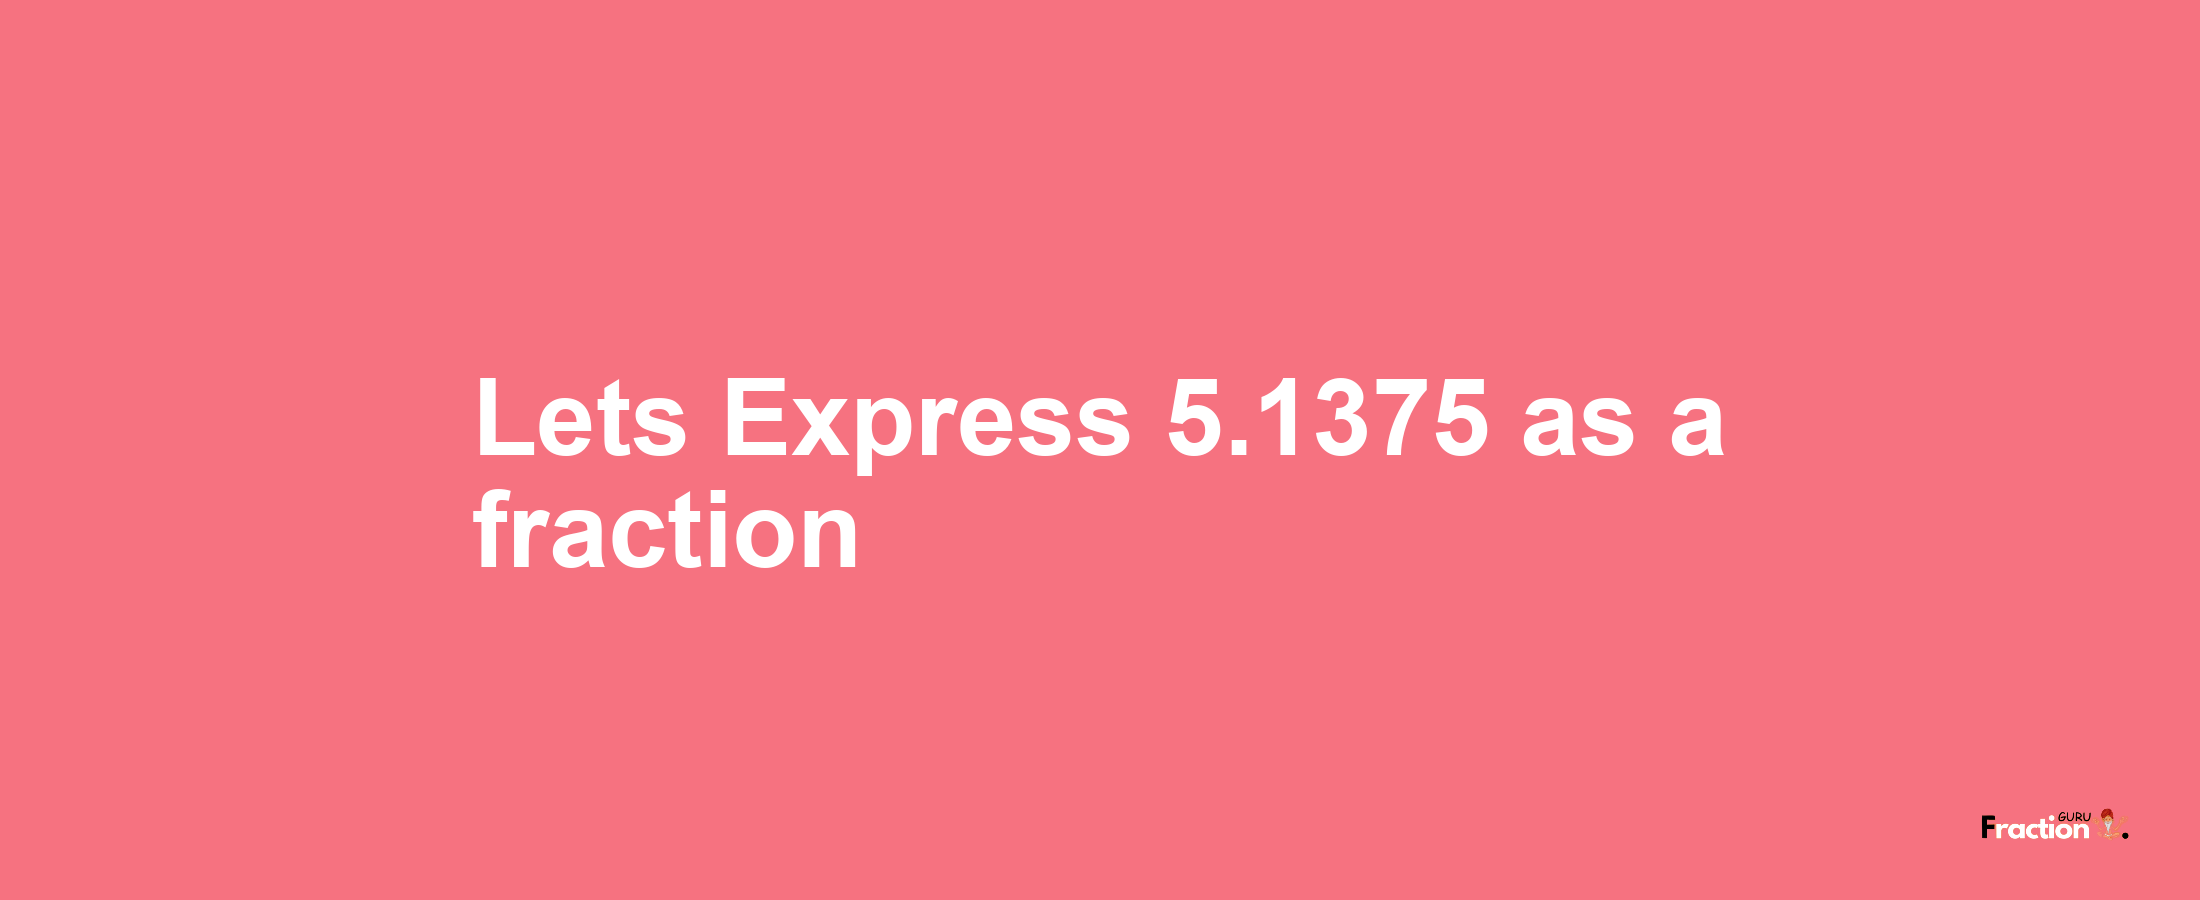 Lets Express 5.1375 as afraction